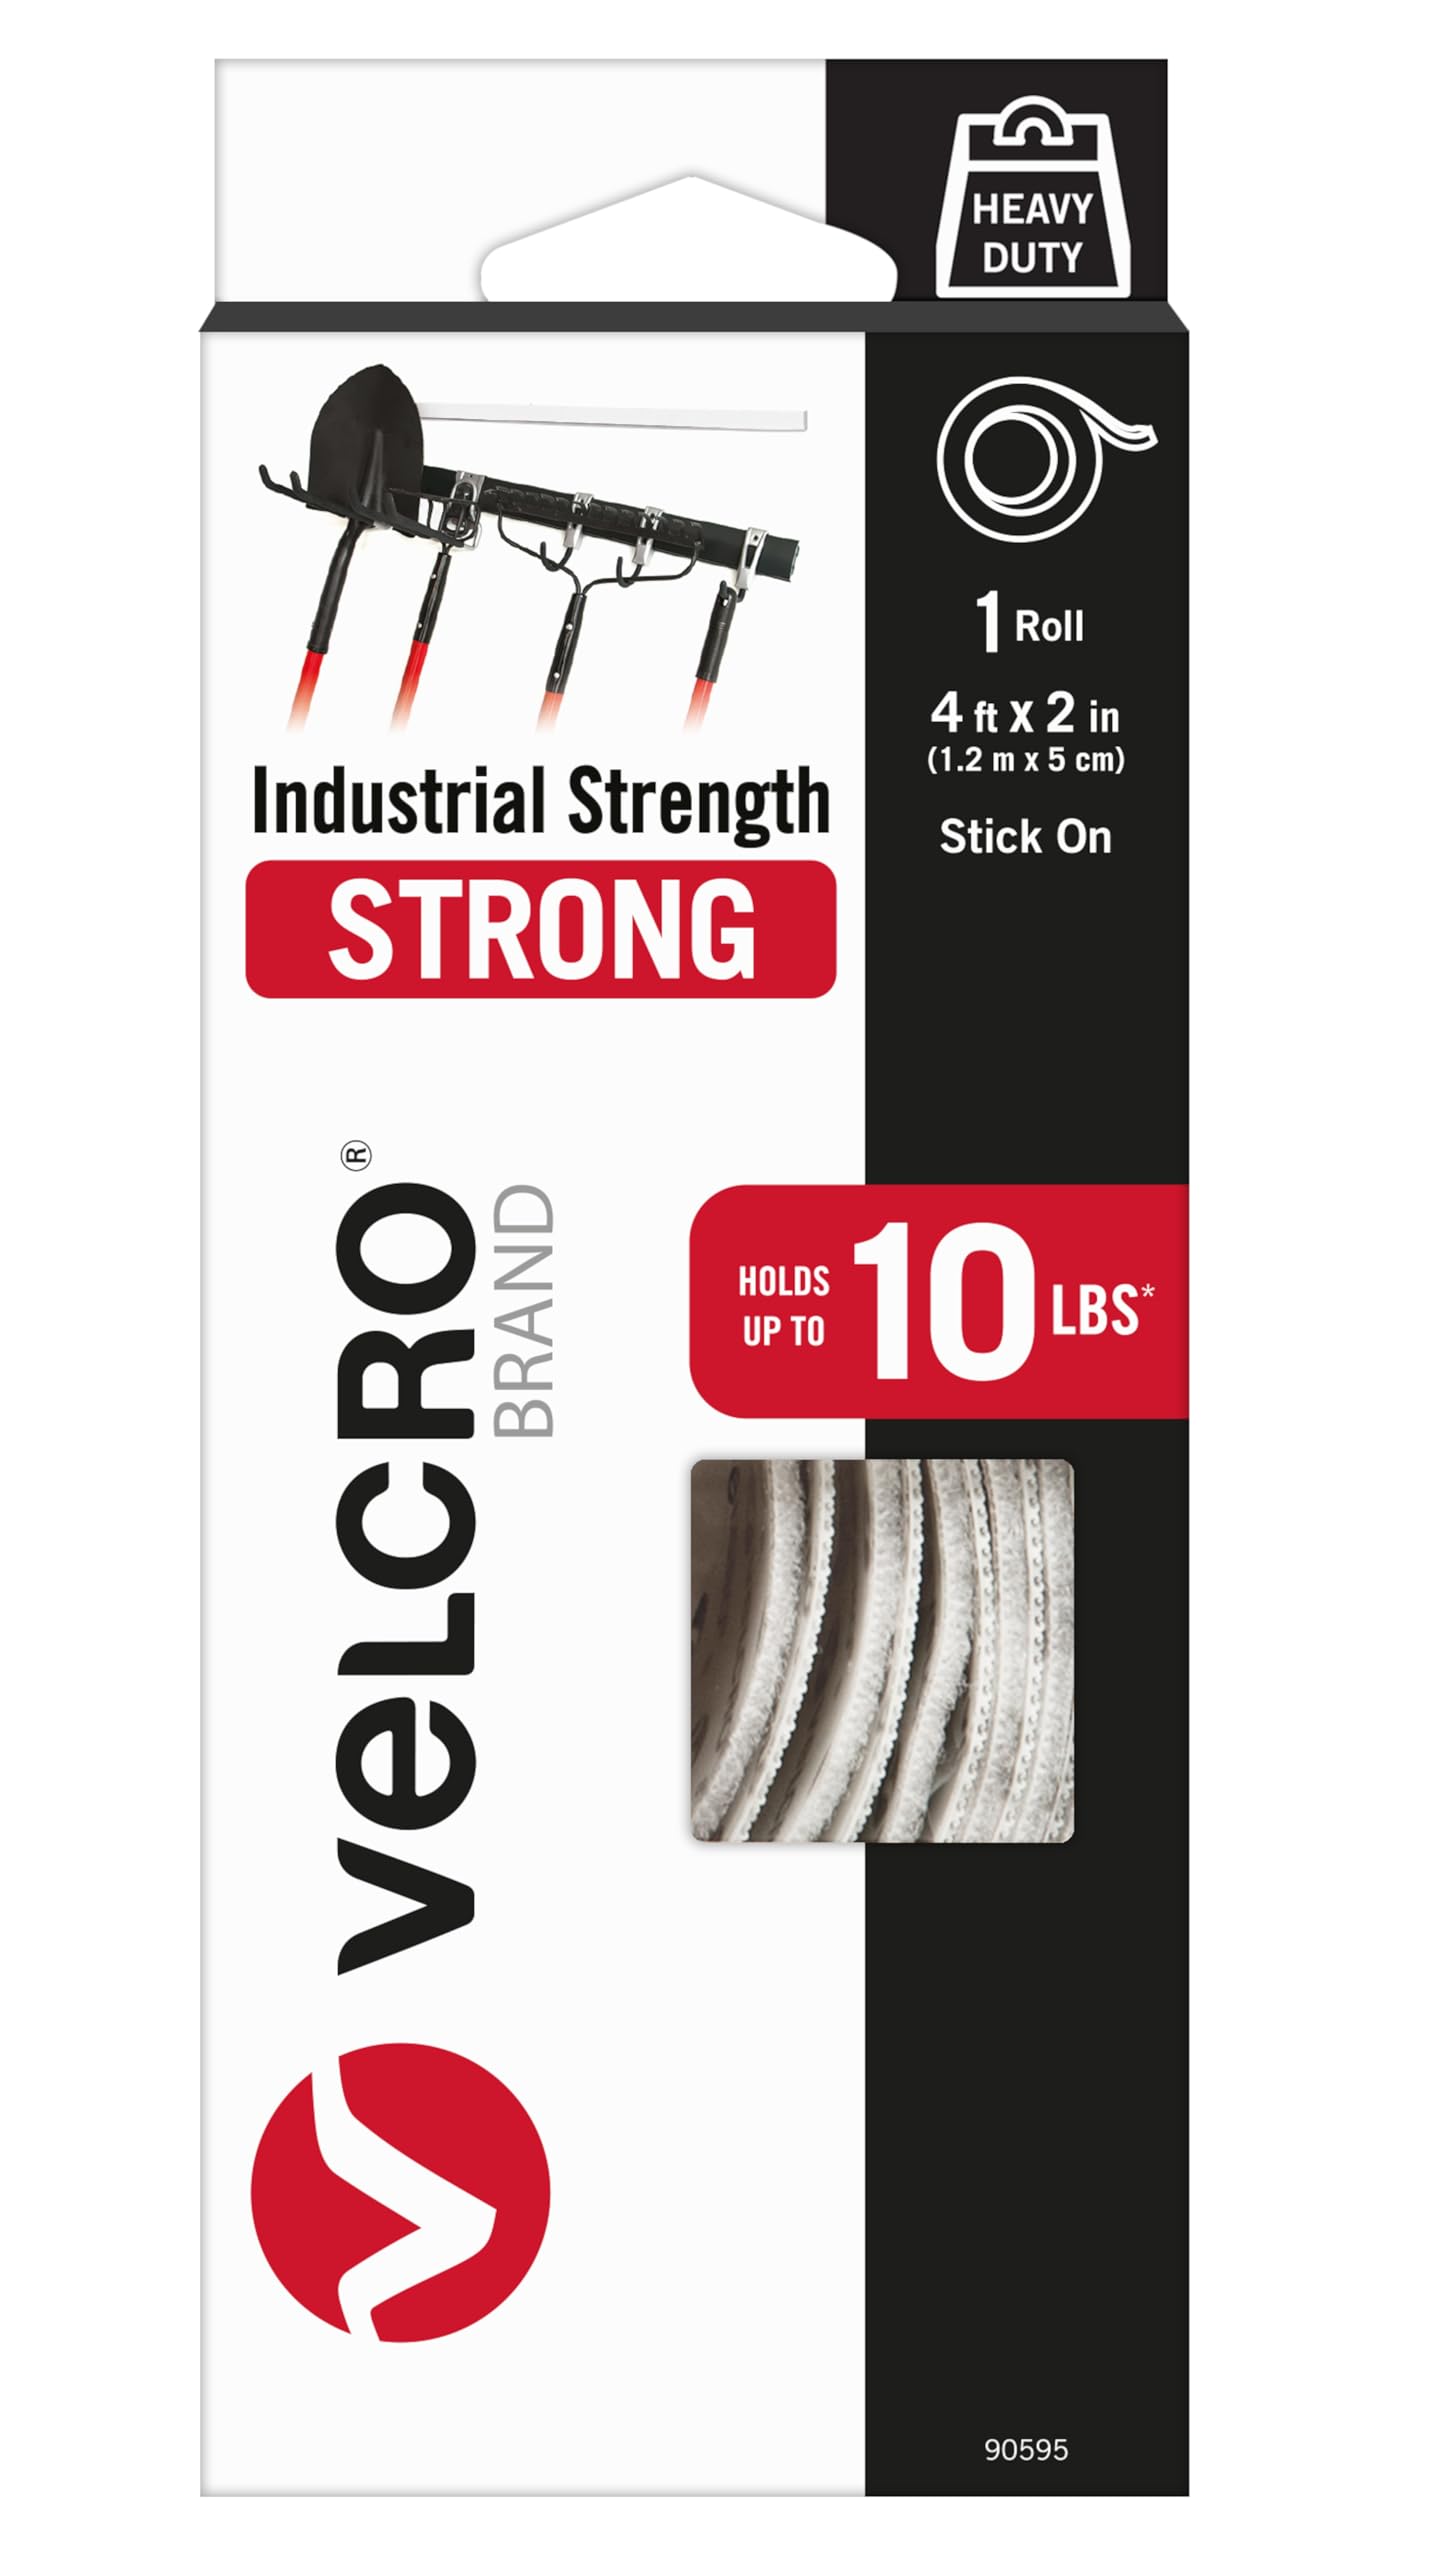 VELCRO Brand - Industrial Strength | Indoor & Outdoor Use | Superior Holding Power on Smooth Surfaces | Size 4ft x 2in | Tape, White - Pack of 1  ($4.49 w/ Free Prime Ship)